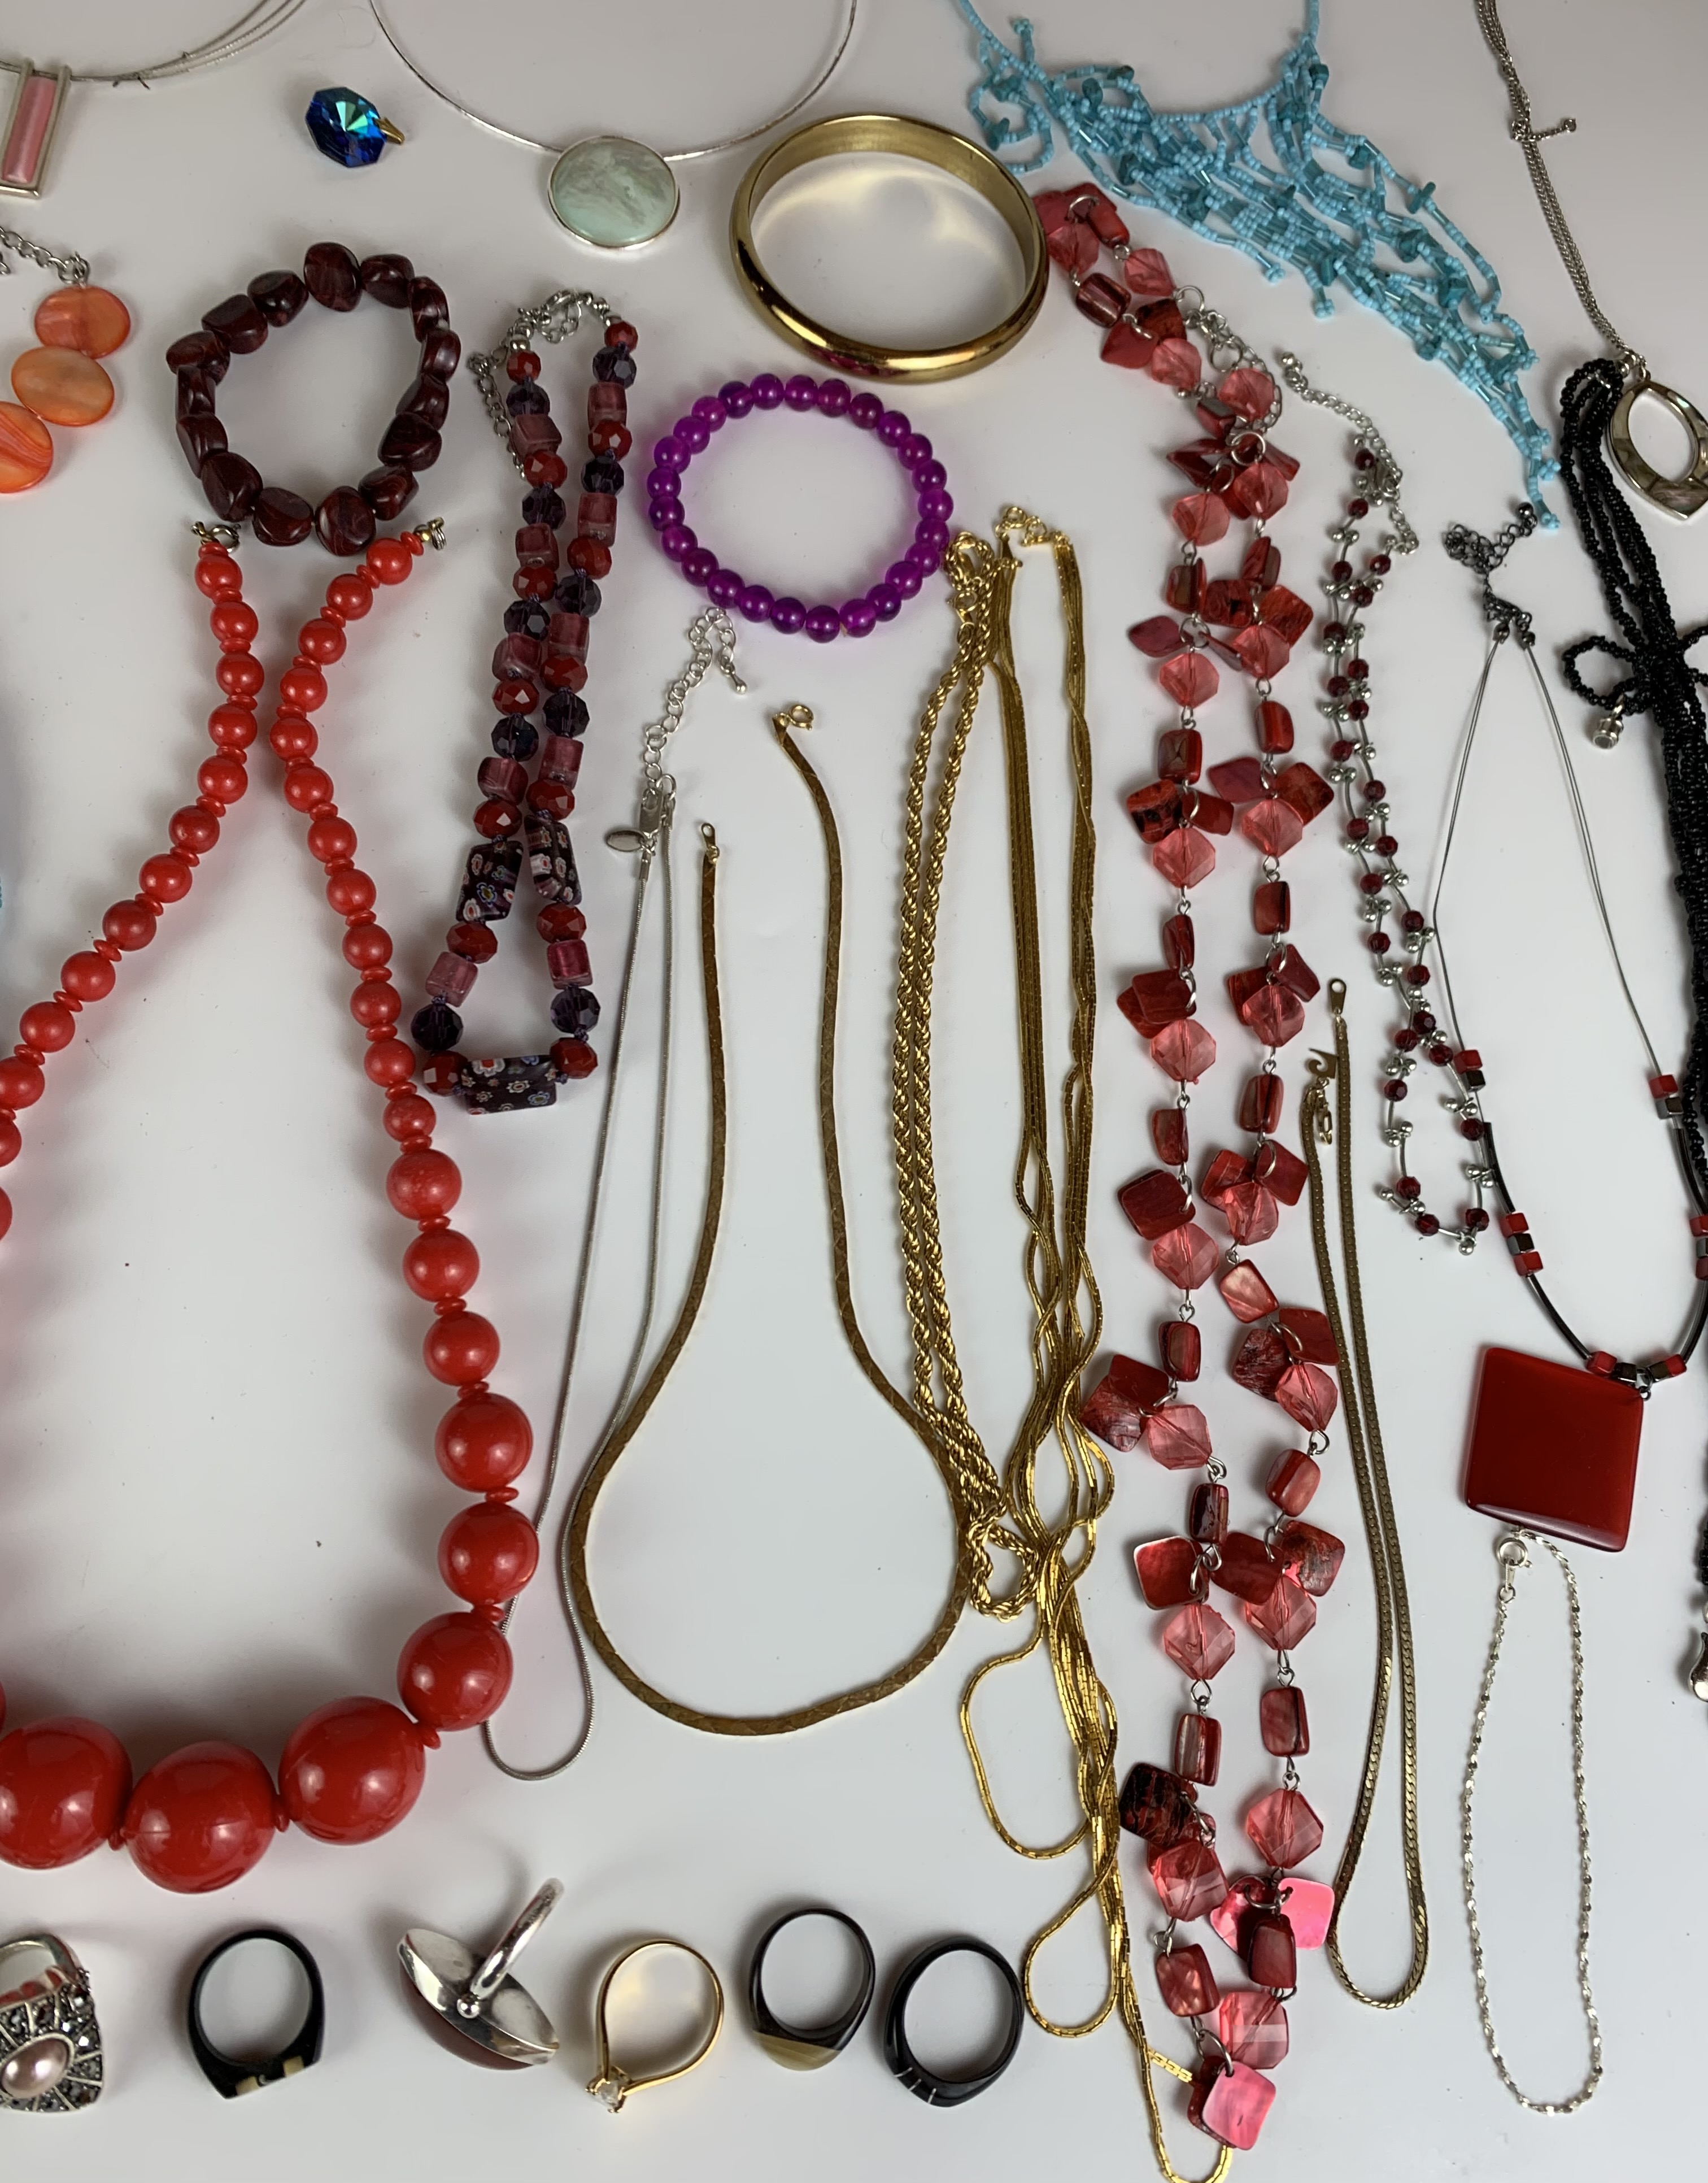 Dress jewellery including necklaces, beads, bracelets, rings etc. - Image 9 of 14